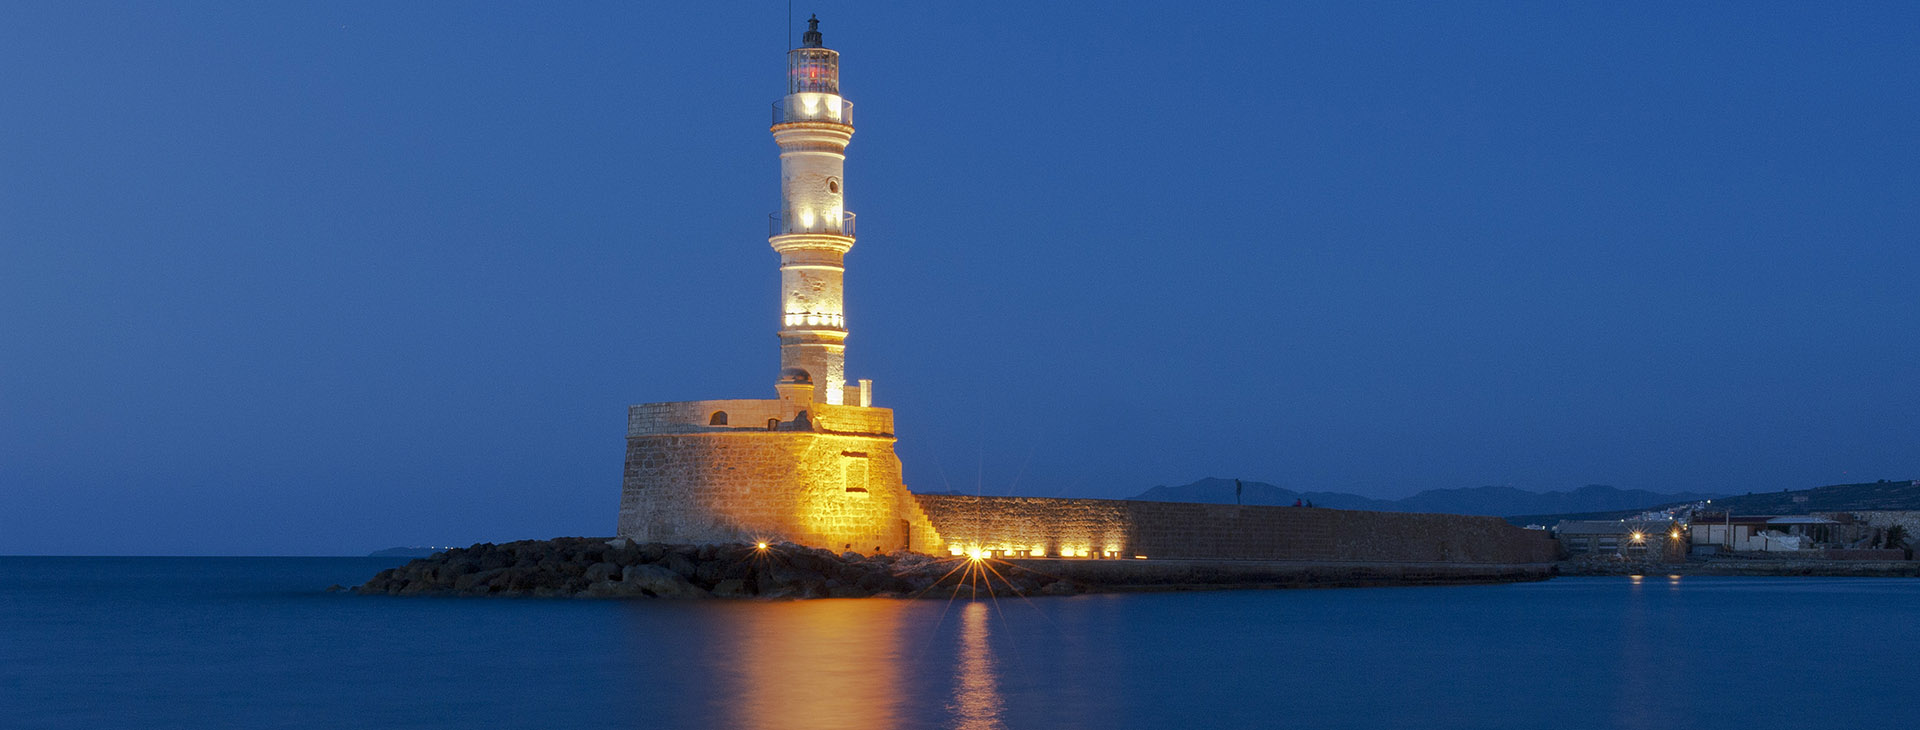 The Venetian Lighthouse at Chania harbour